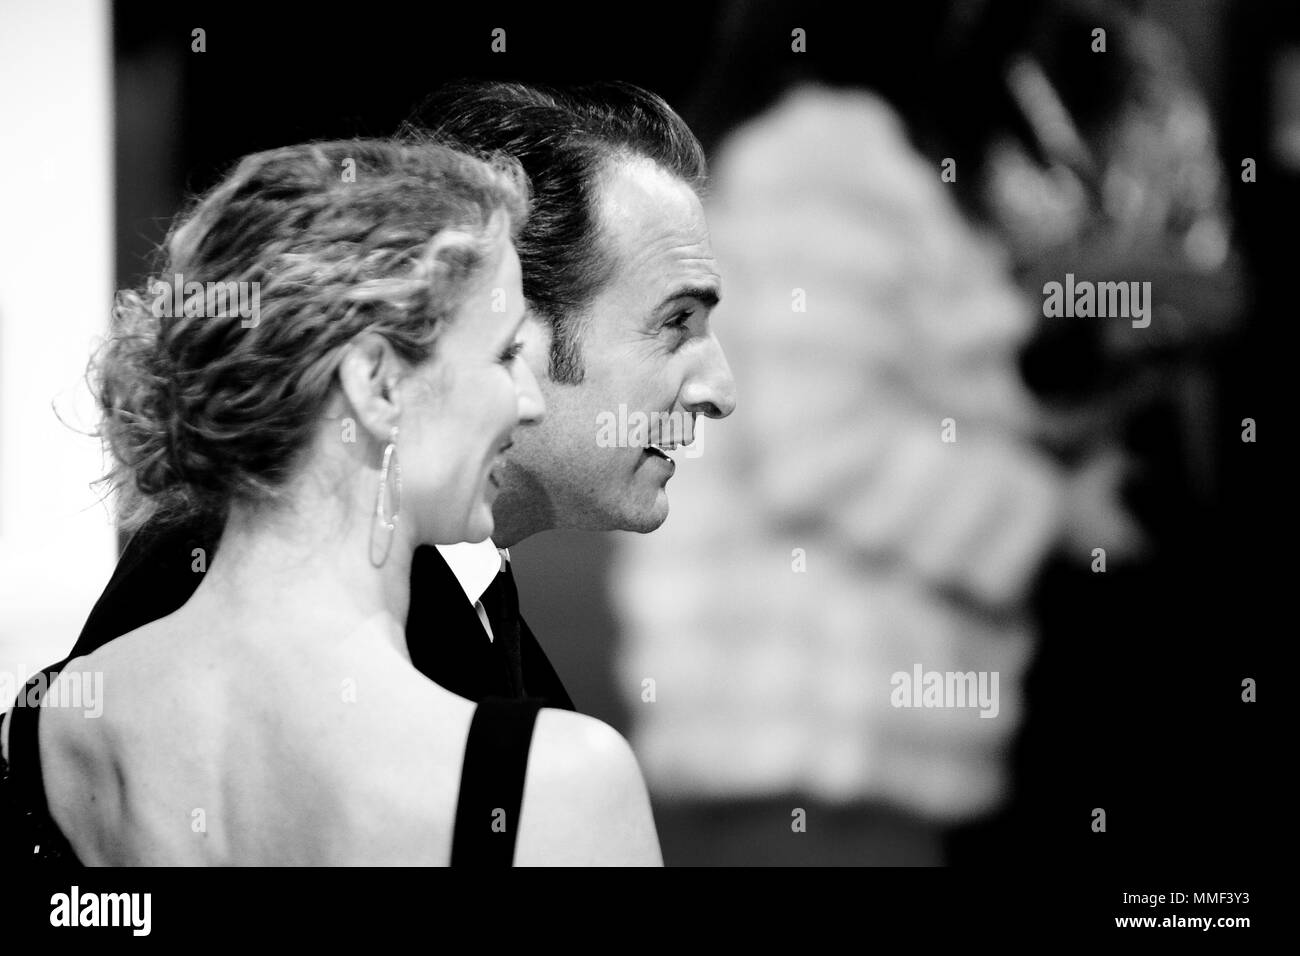 Jean Dujardin attends the 2012 Orange British Academy Film Awards at The Royal Opera House, Covent Garden, London, 12 February 2012, --- Image by © Paul Cunningham Stock Photo